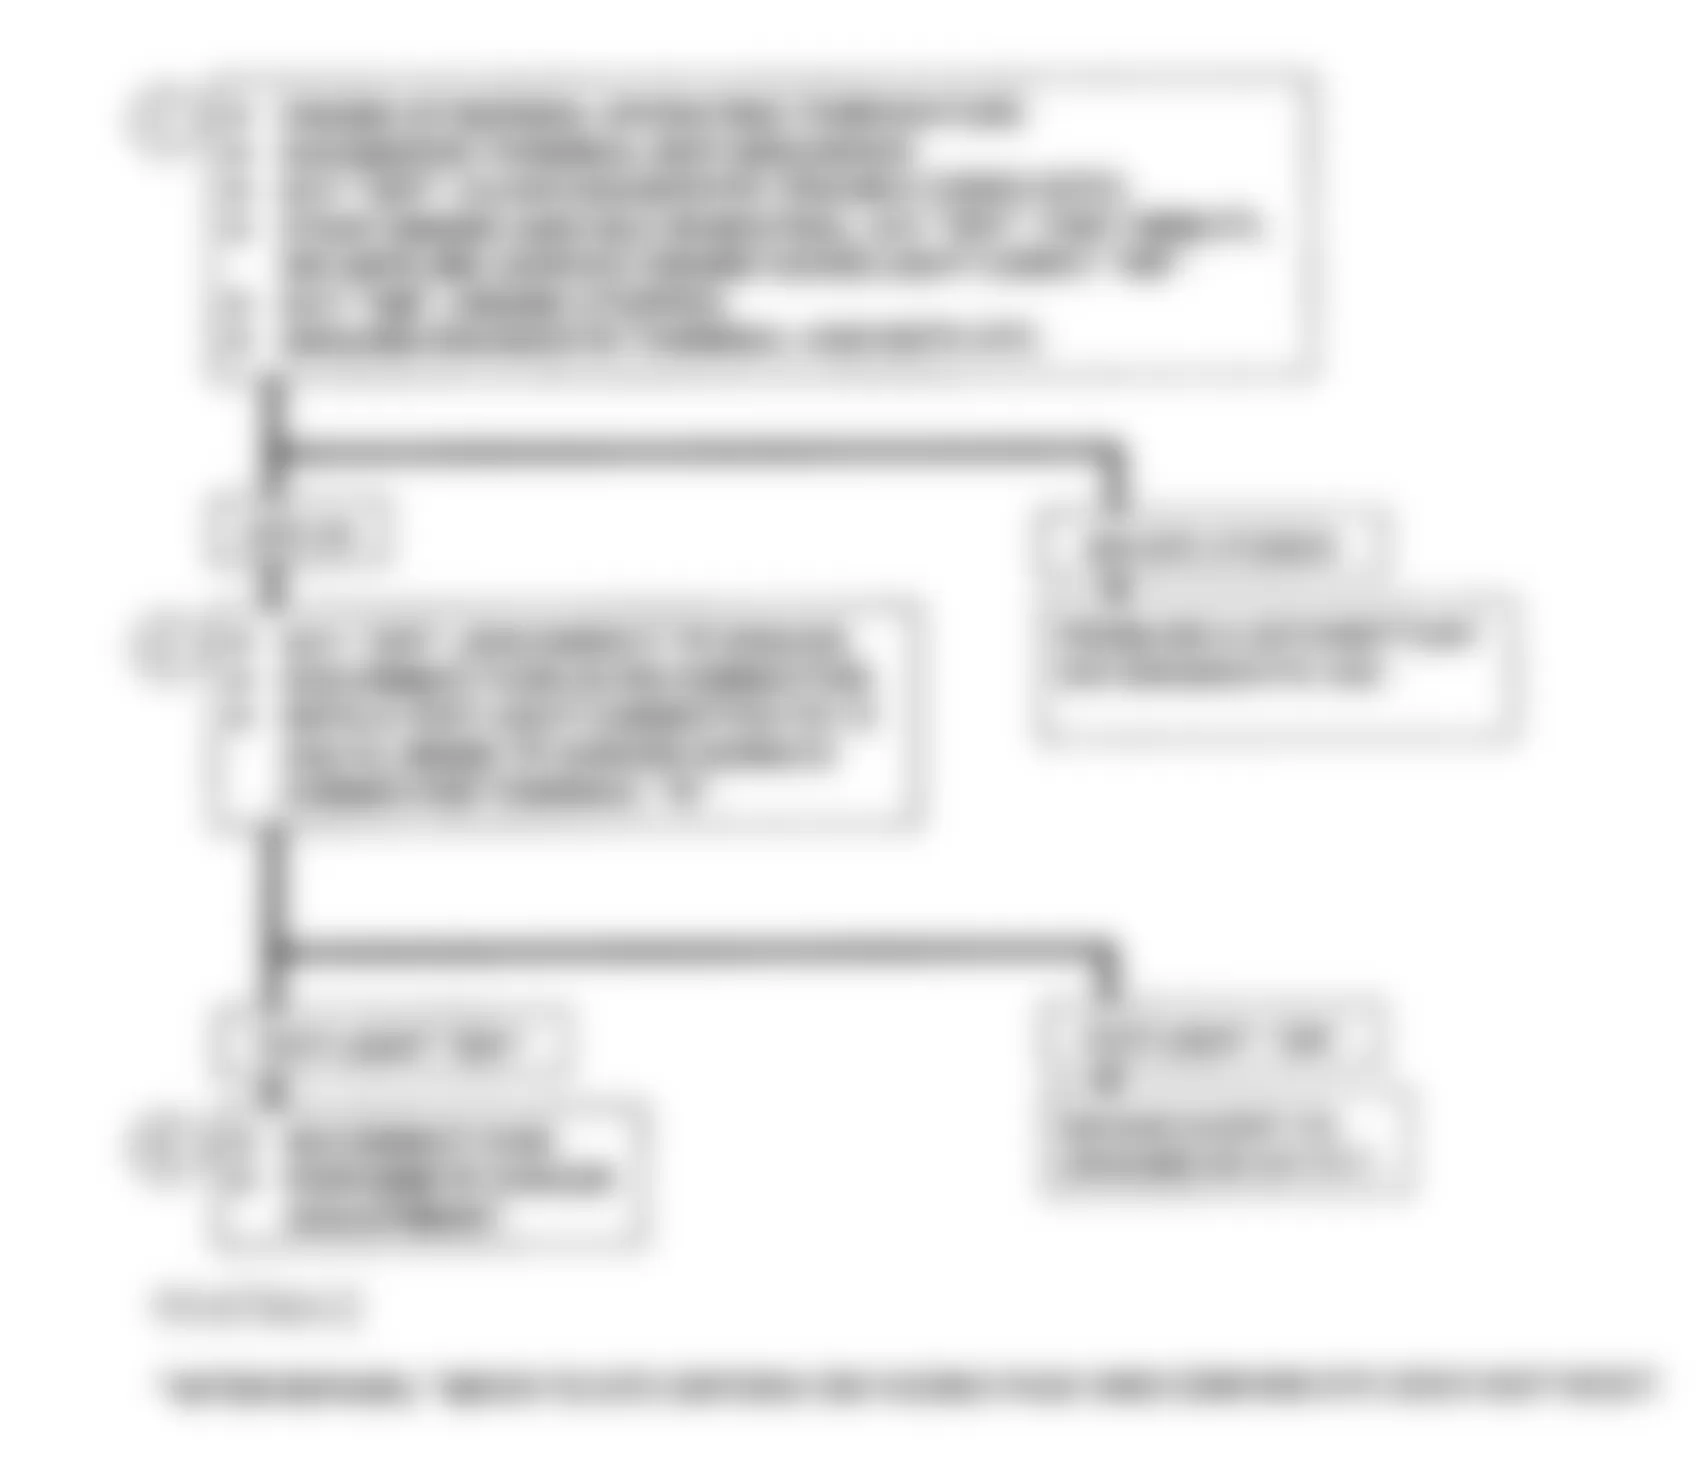 GMC Pickup C3500 1993 - Component Locations -  DTC 23, Flowchart, TPS Misadjusted